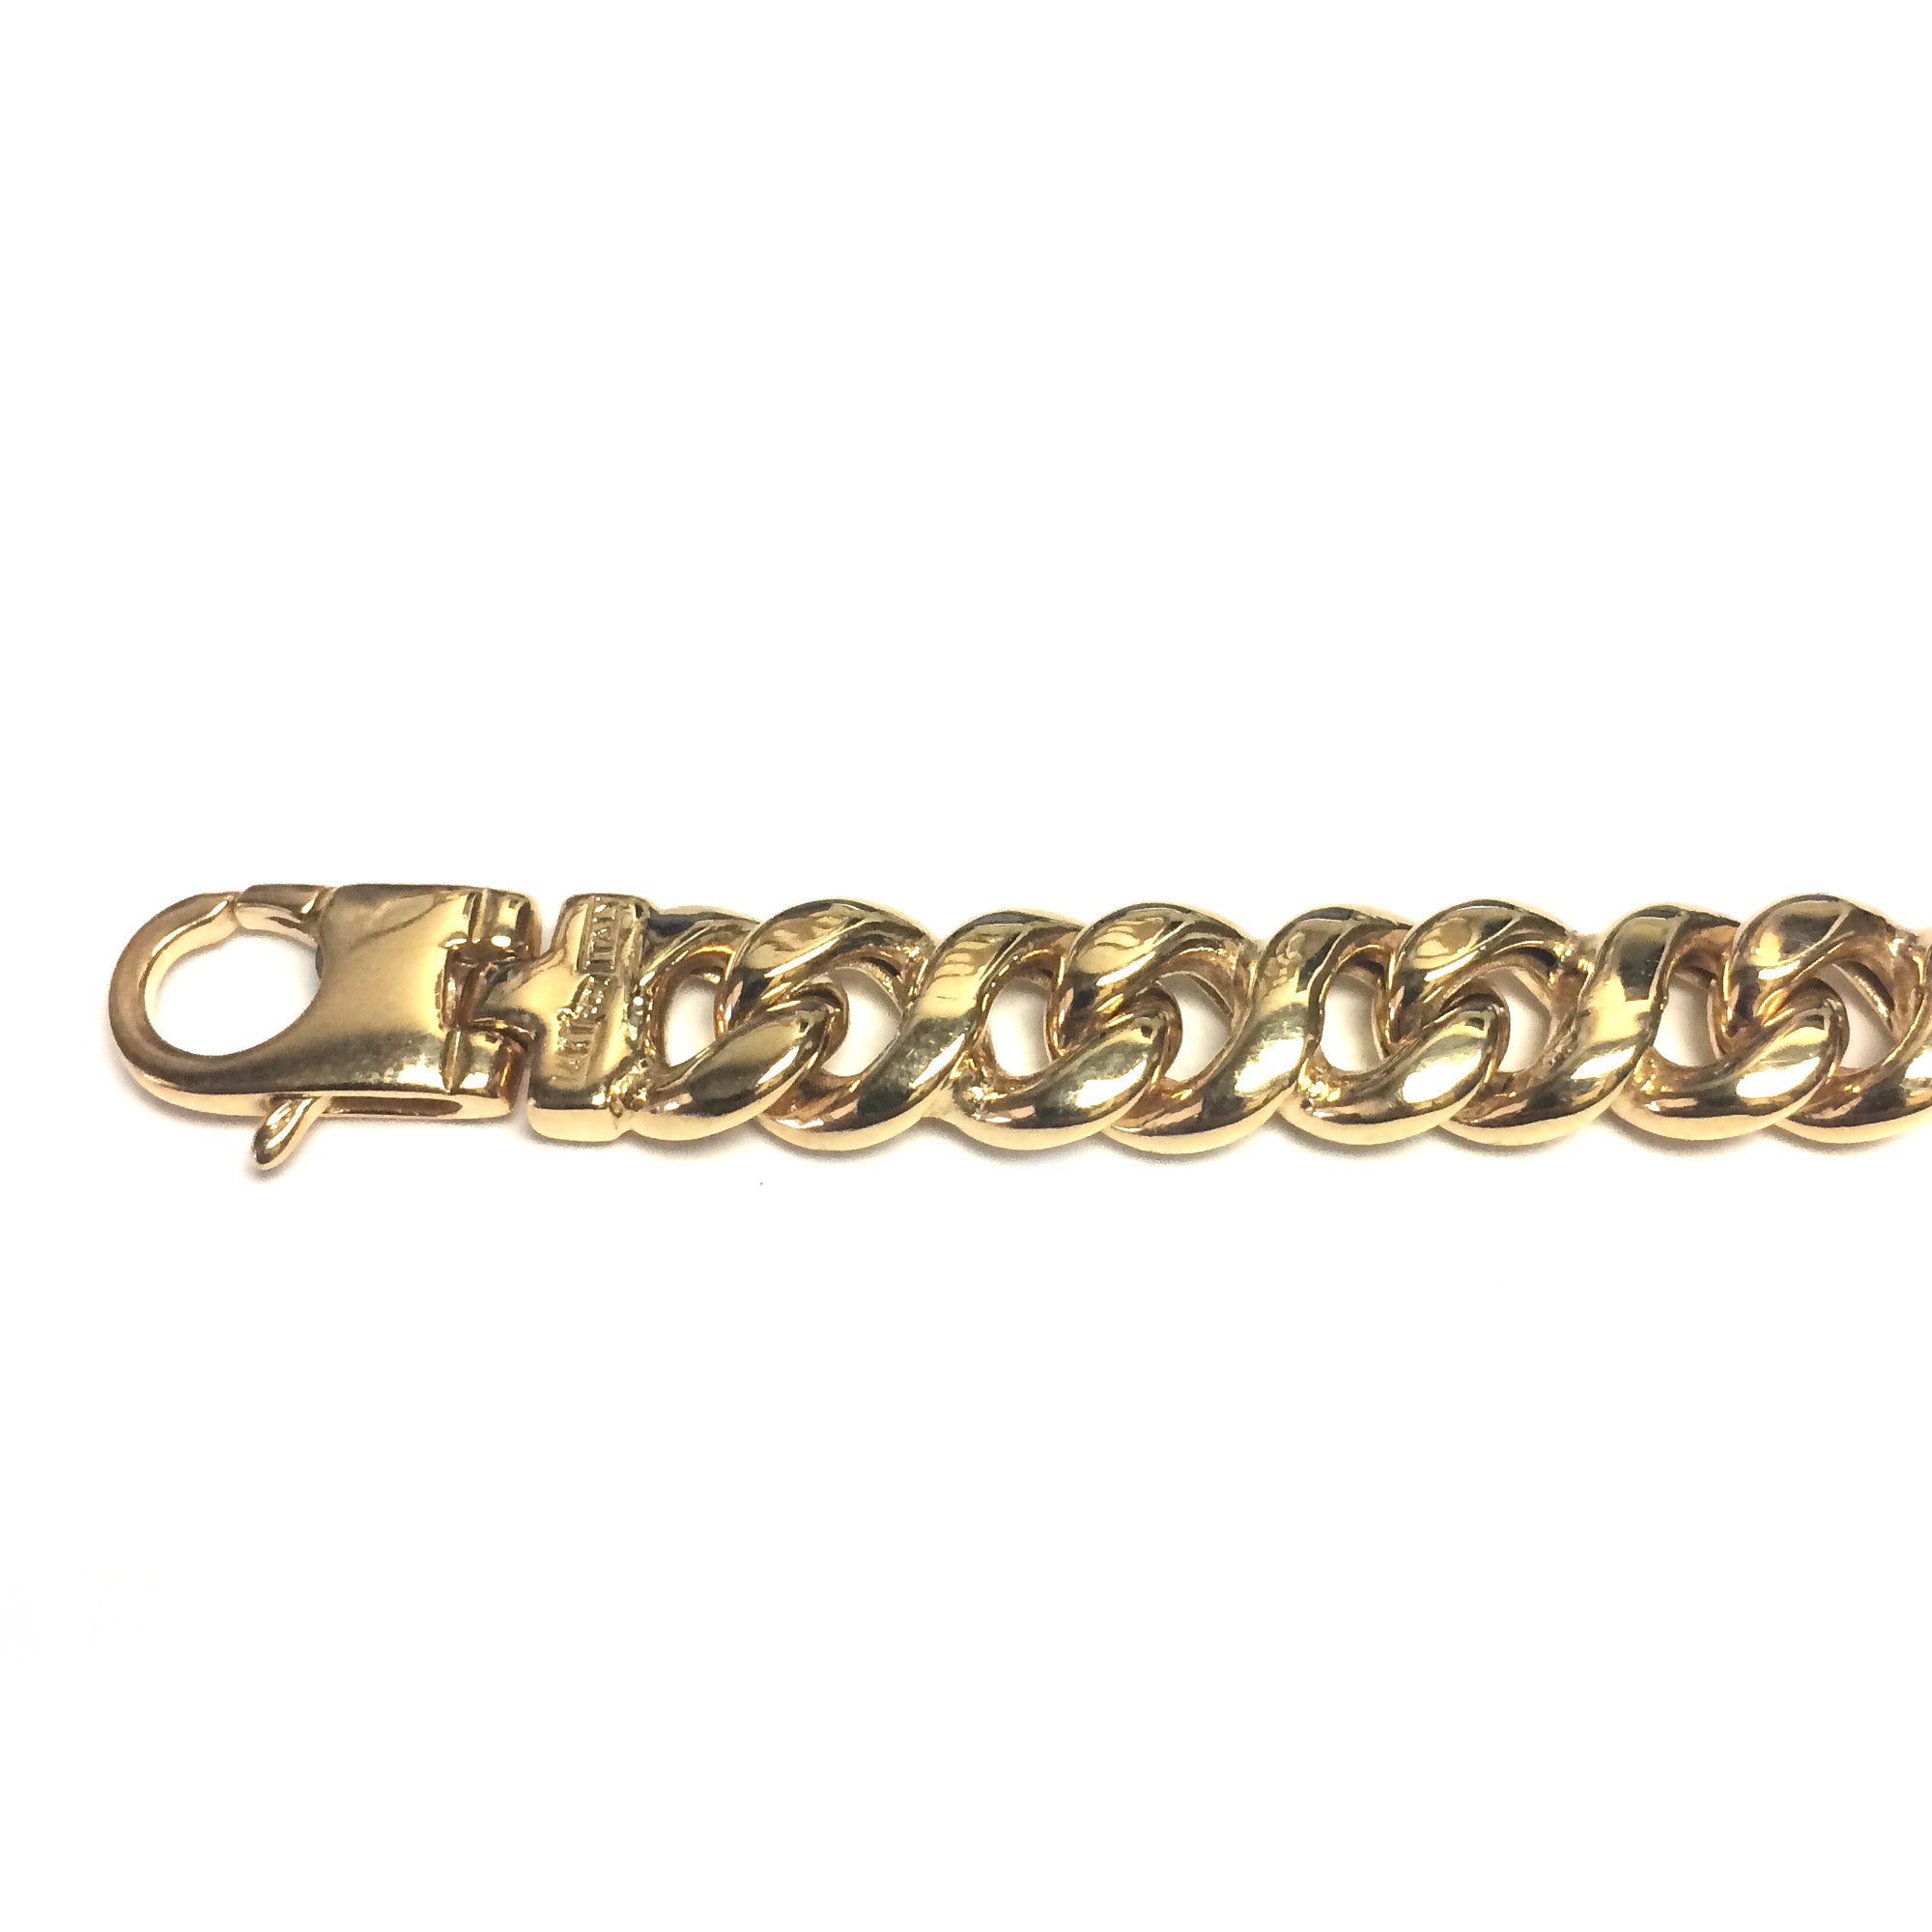 14k Yellow Gold Oval Curb Link Mens Bracelet, 8.5" fine designer jewelry for men and women